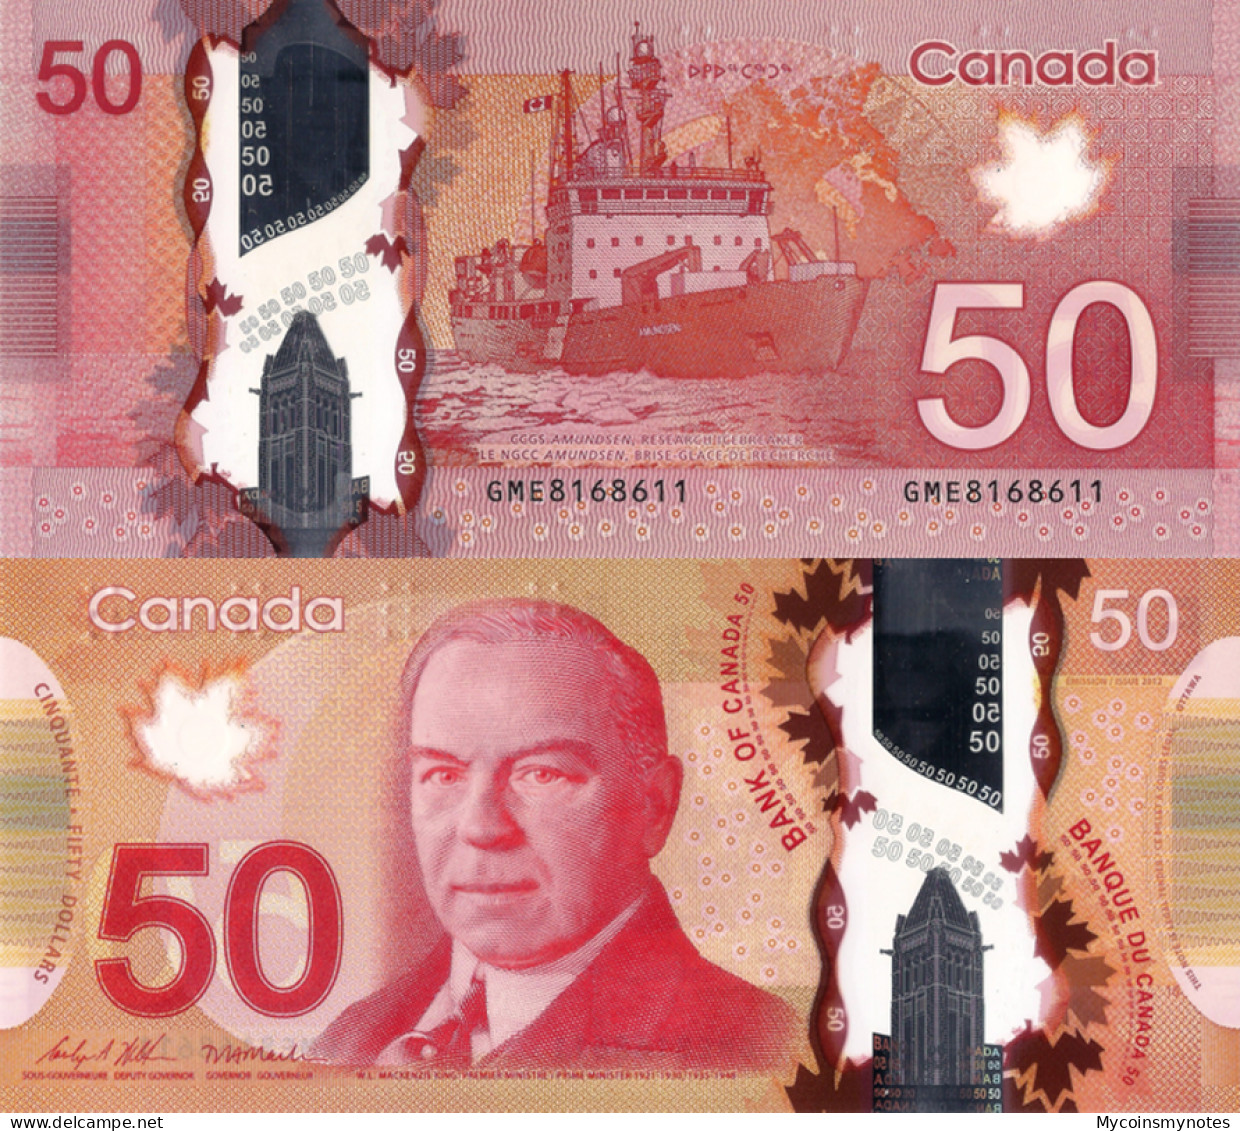 CANADA 50 DOLLAR 2012 "2015" (Not Listed In In The Catalog), Polymer, UNC - Canada